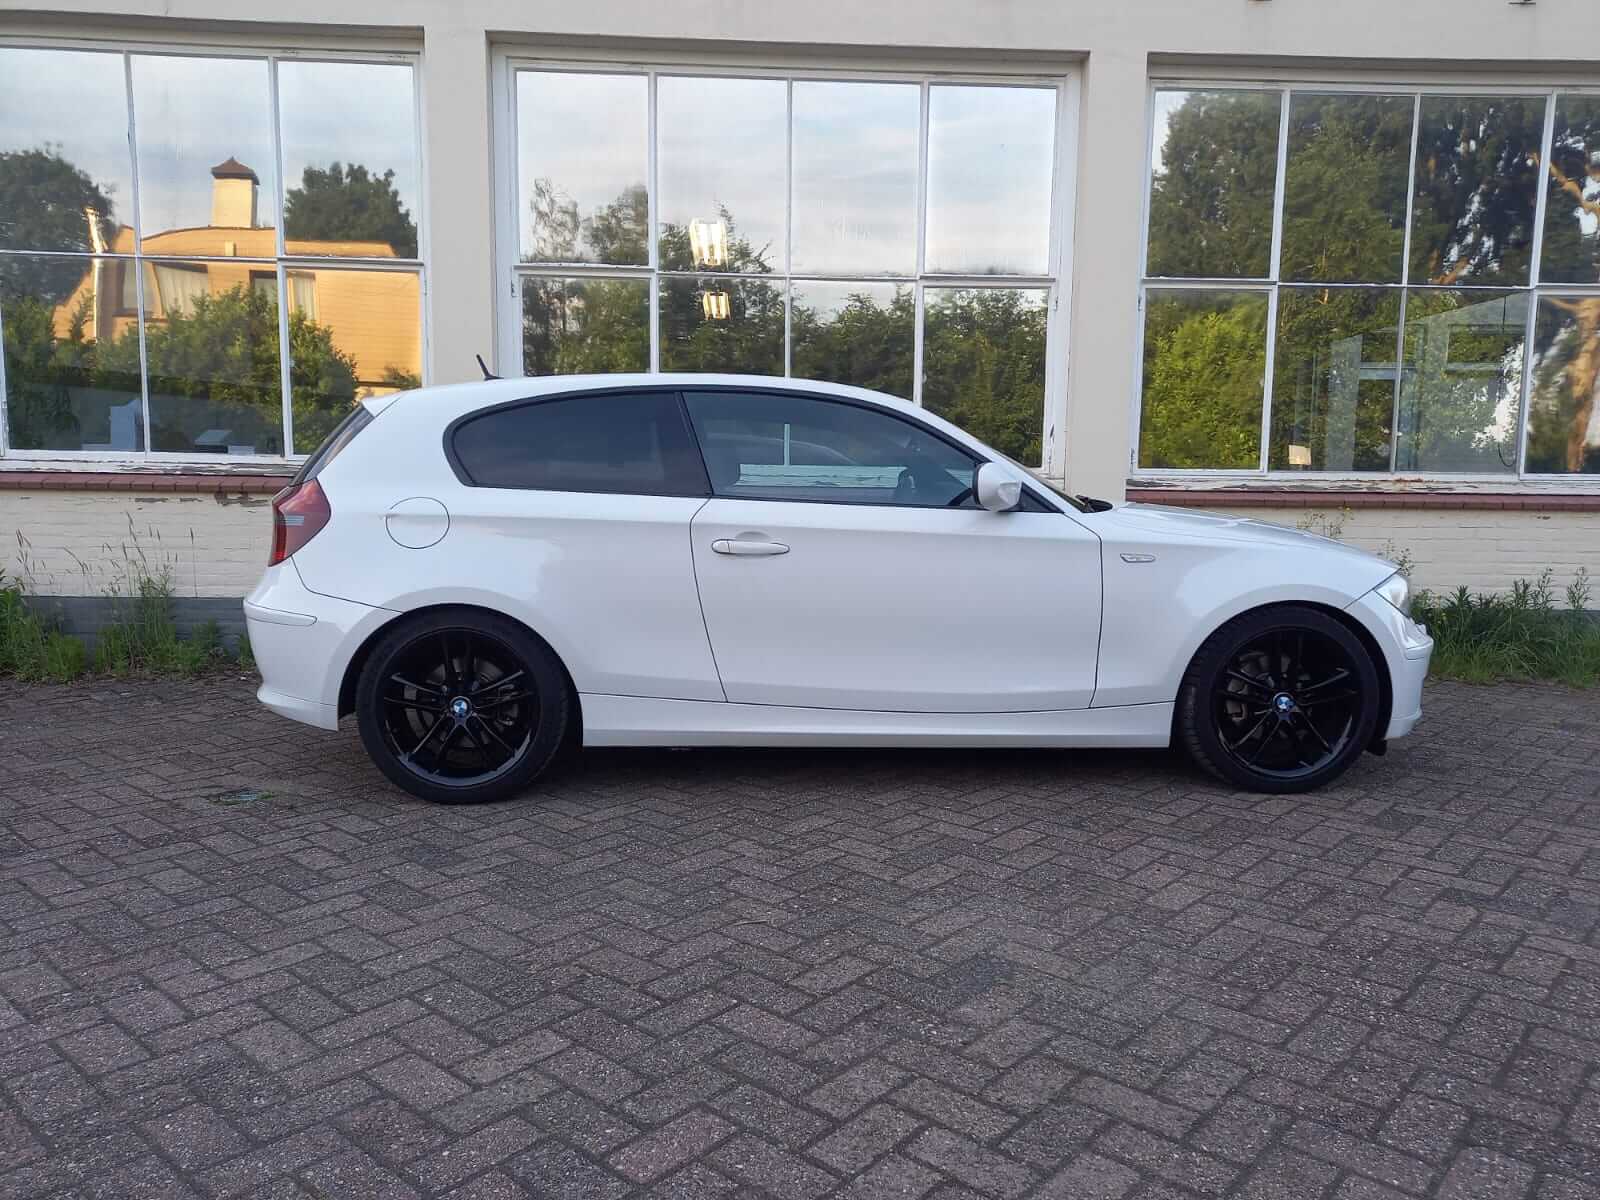 BMW 1-serie 120i wit style 182 styling 182 1 serie breedset 3 deurs wit